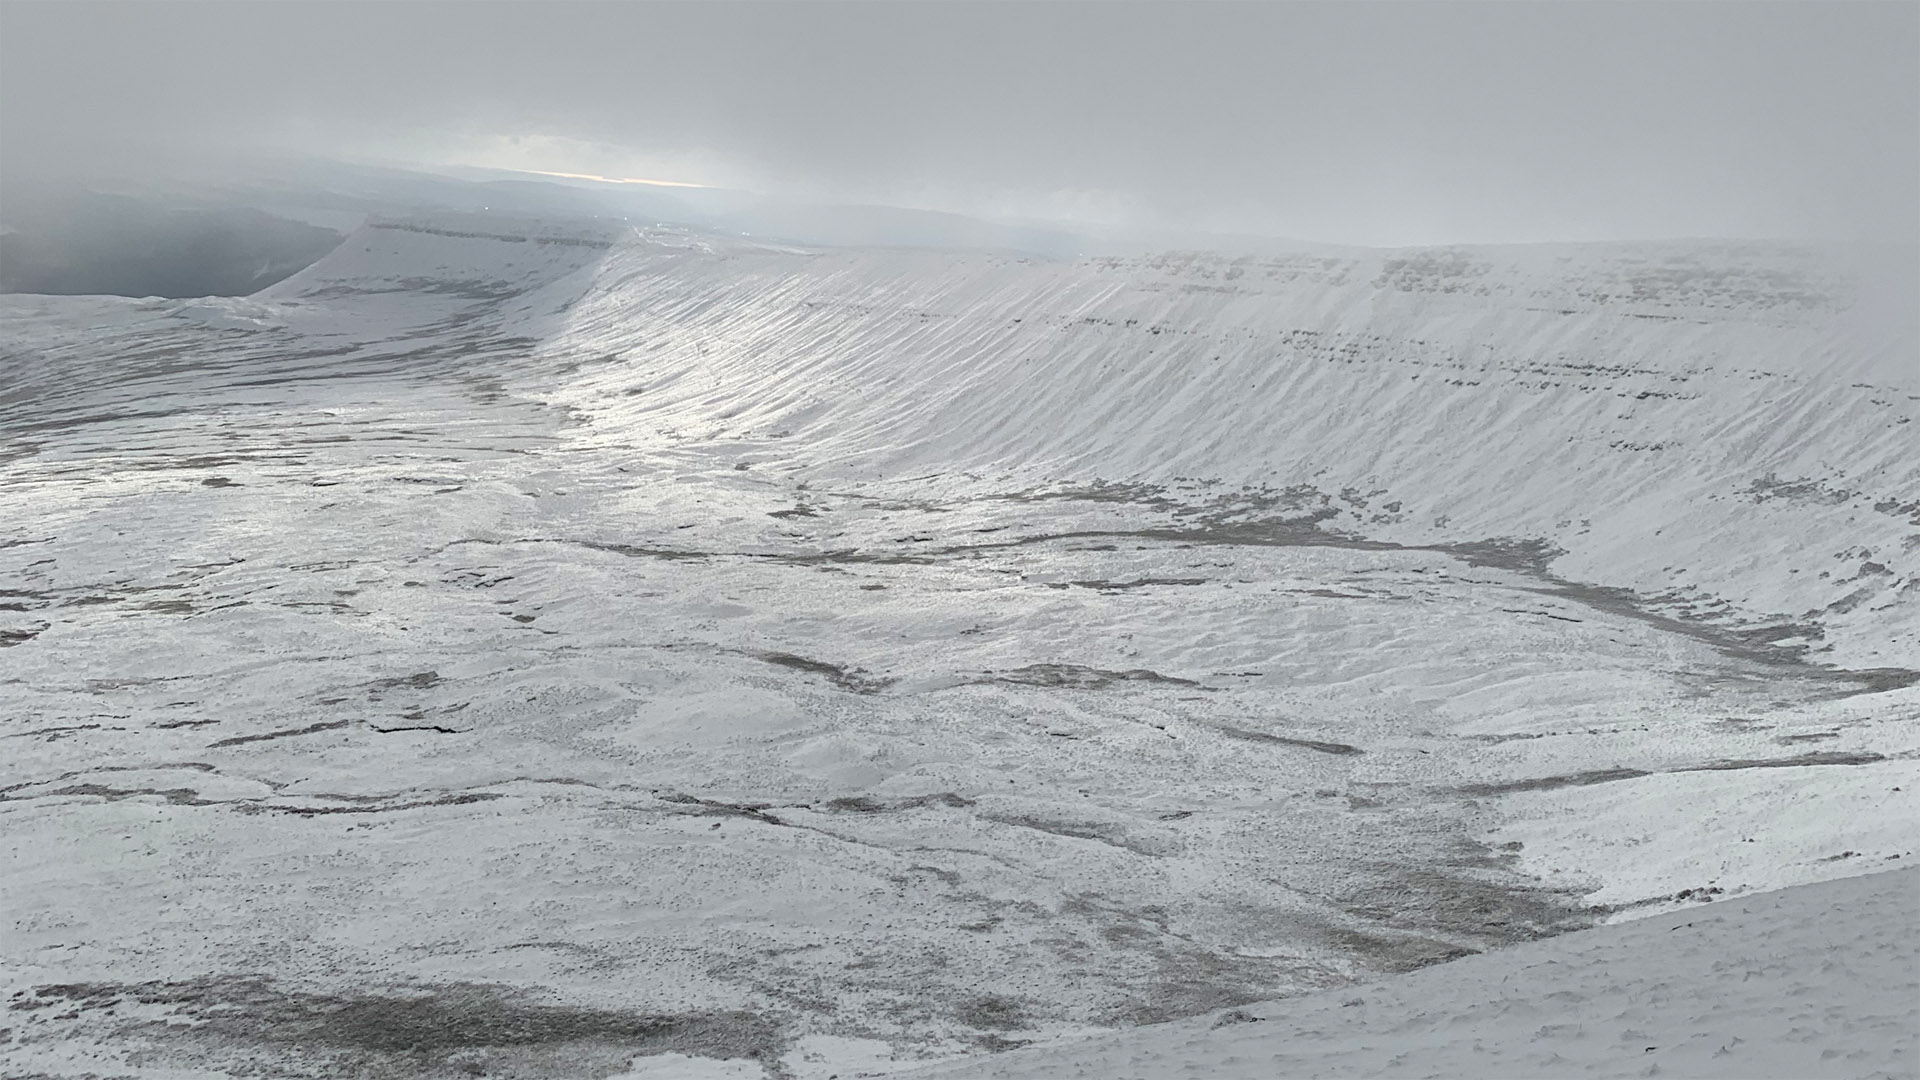 The view from Pen y Fan on a particularly wintery day in 2021